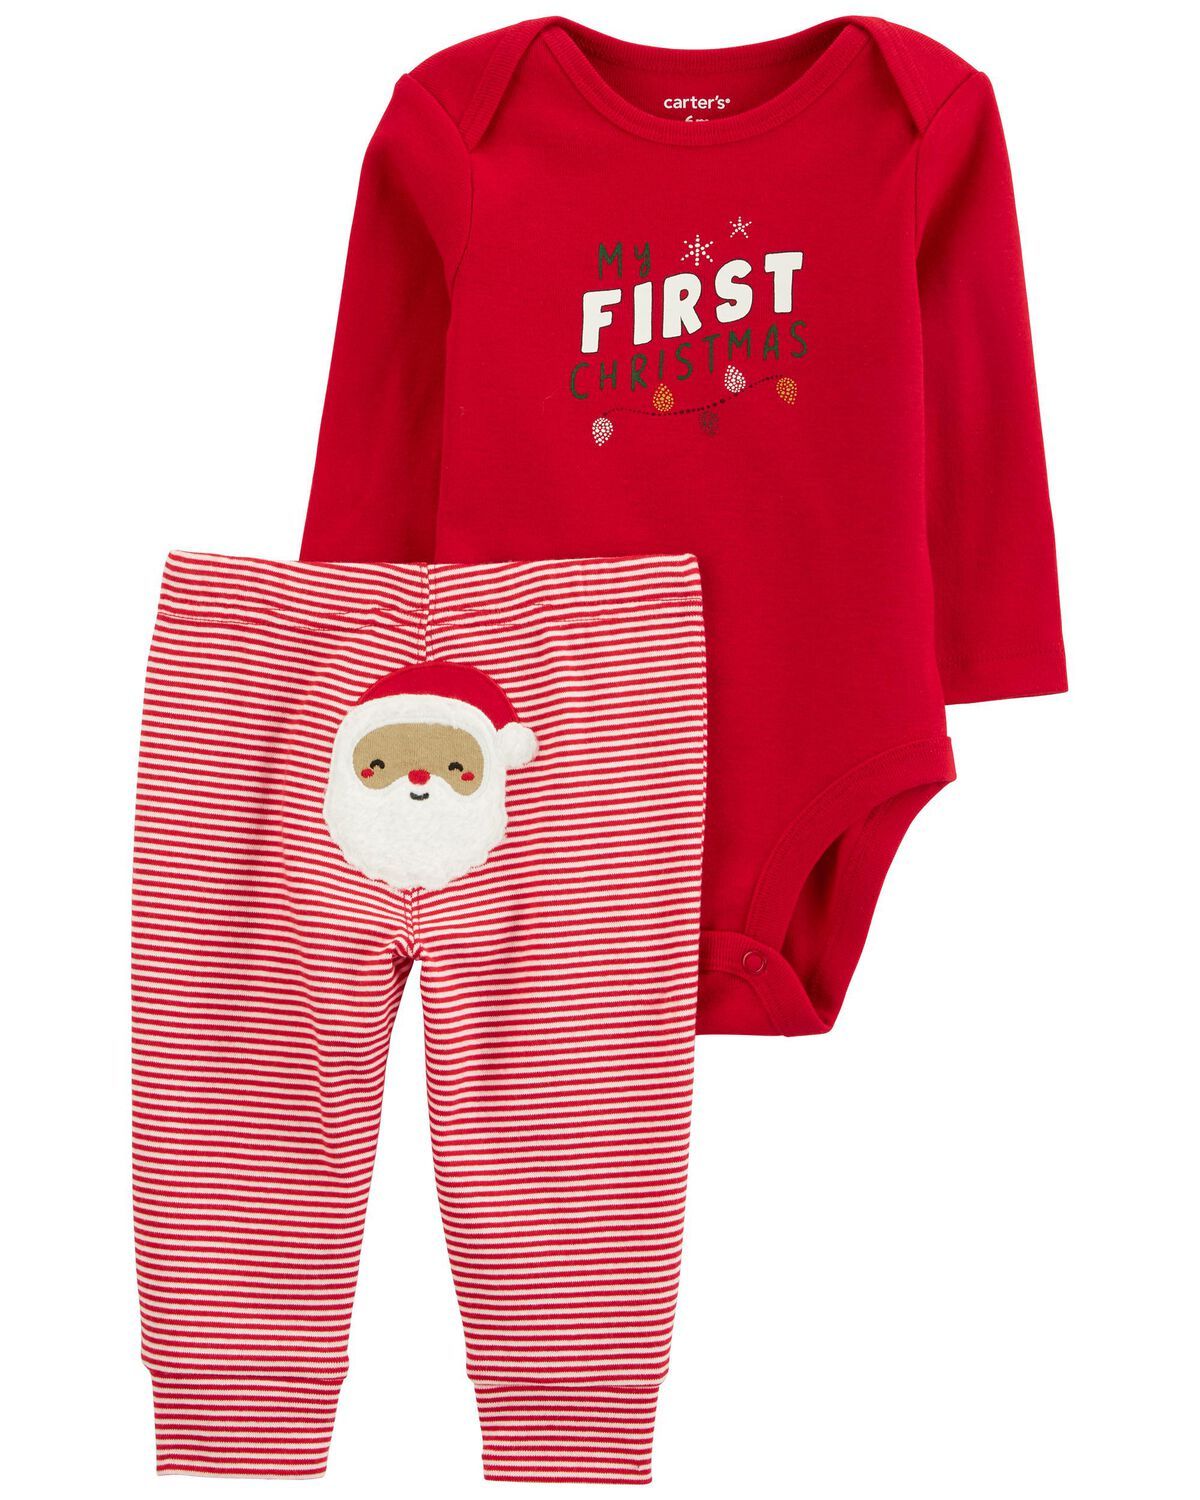 Red Baby 2-Piece My First Christmas Outfit Set | carters.com | Carter's